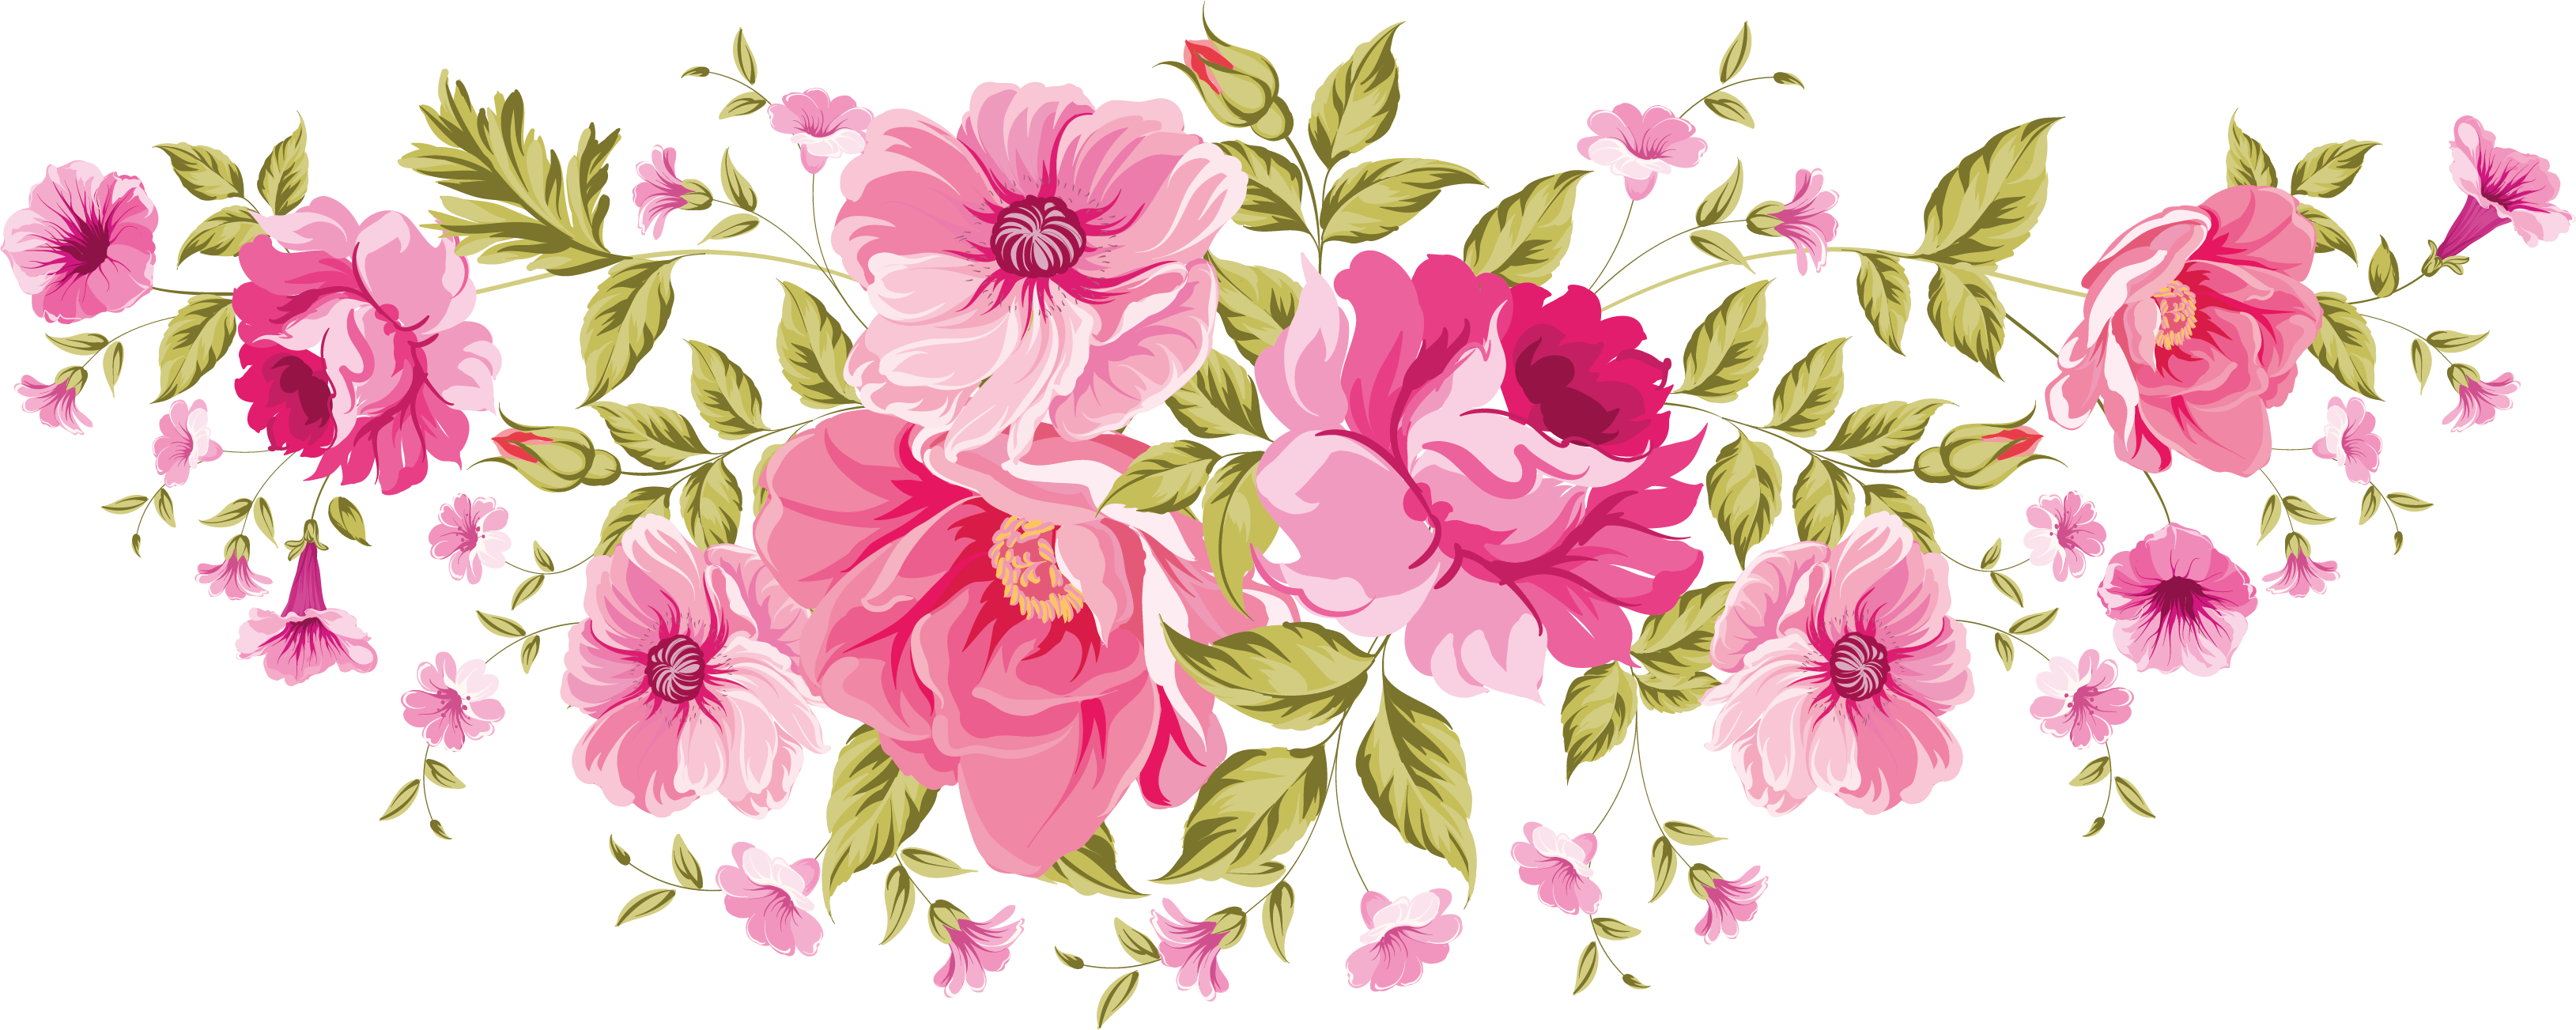 Colored Floral Png Image Background Birthday Flowers In